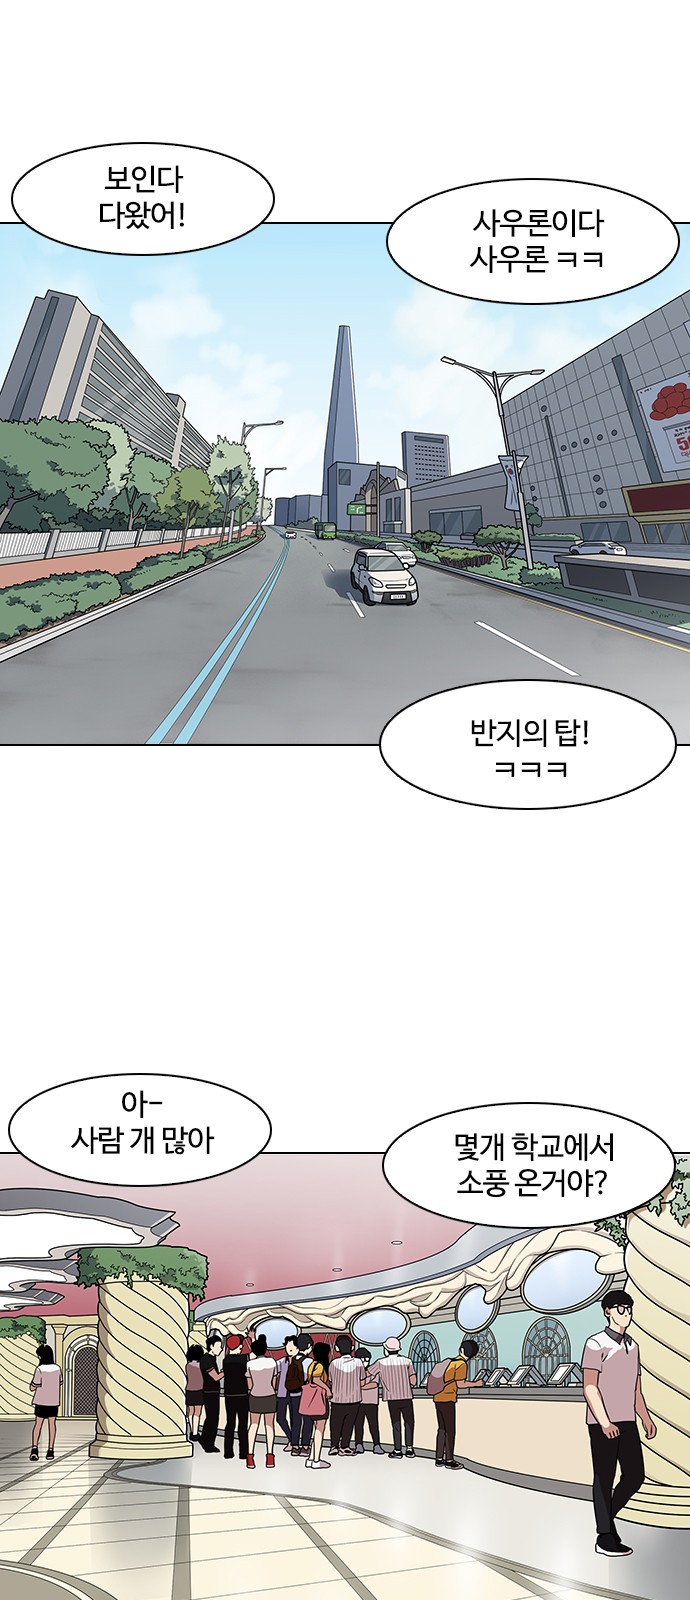 Lookism - Chapter 139 - Page 1